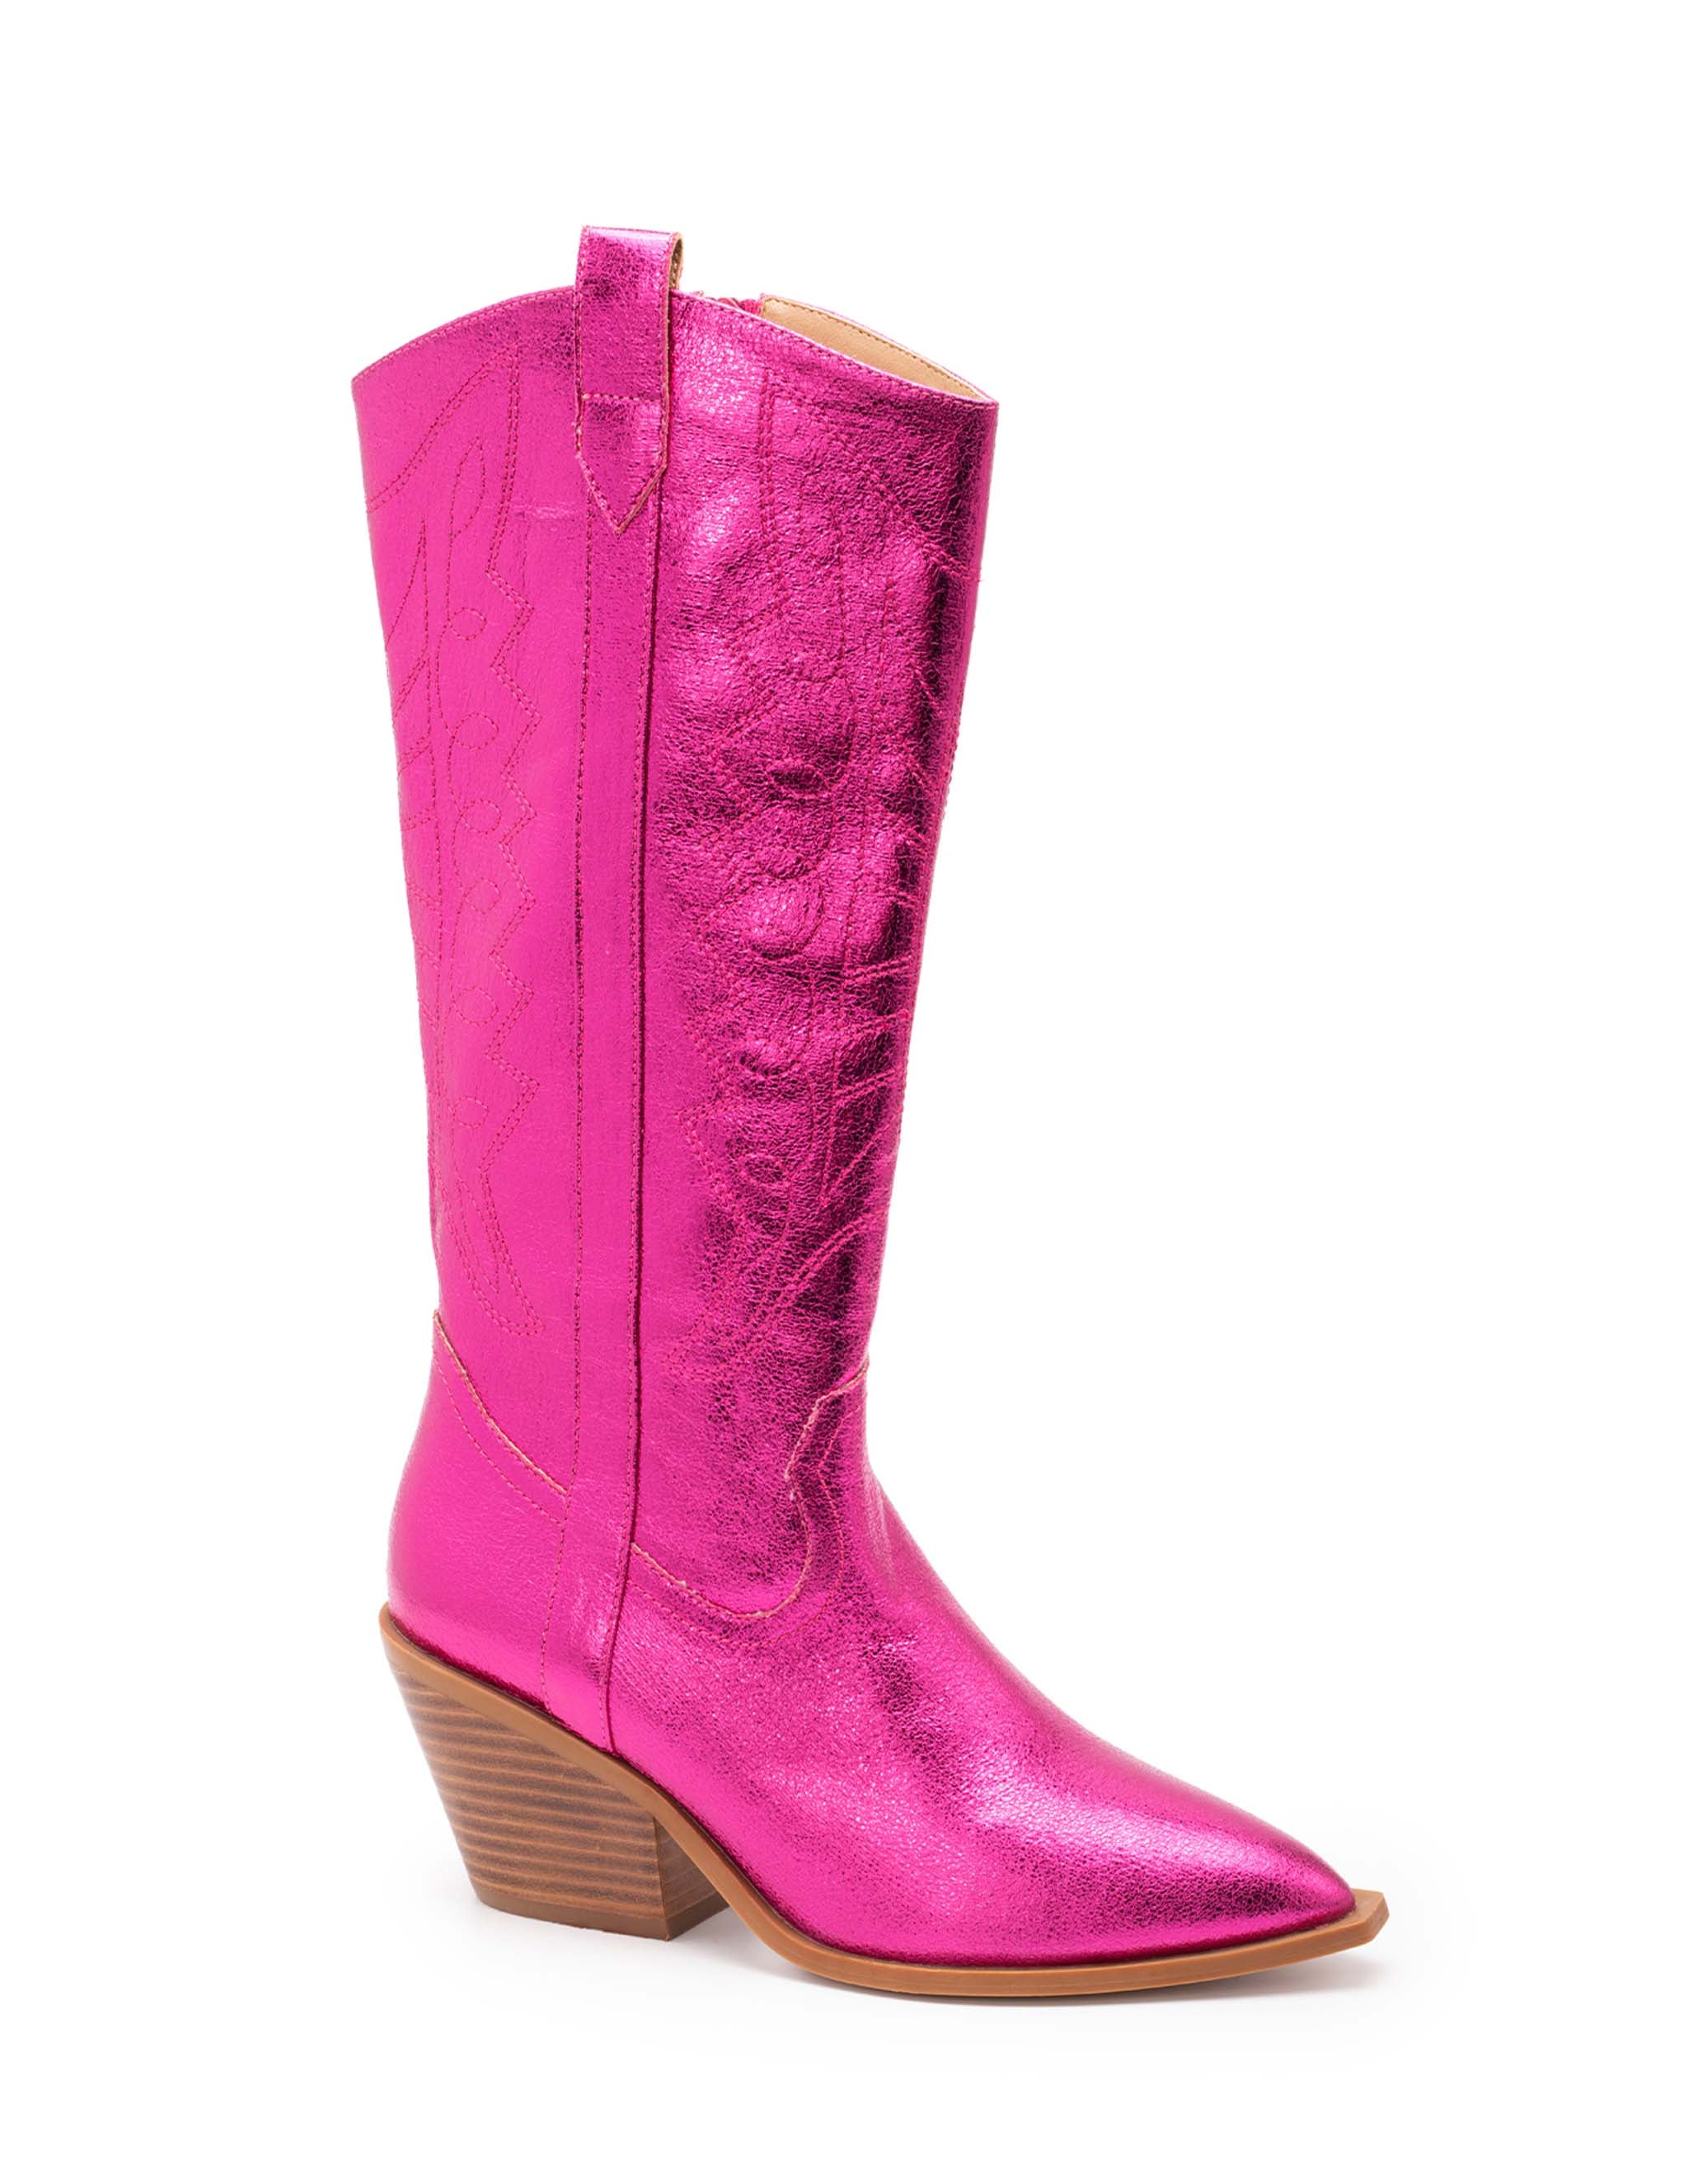 Corky's Howdy Tall Pull-on Metallic Boot